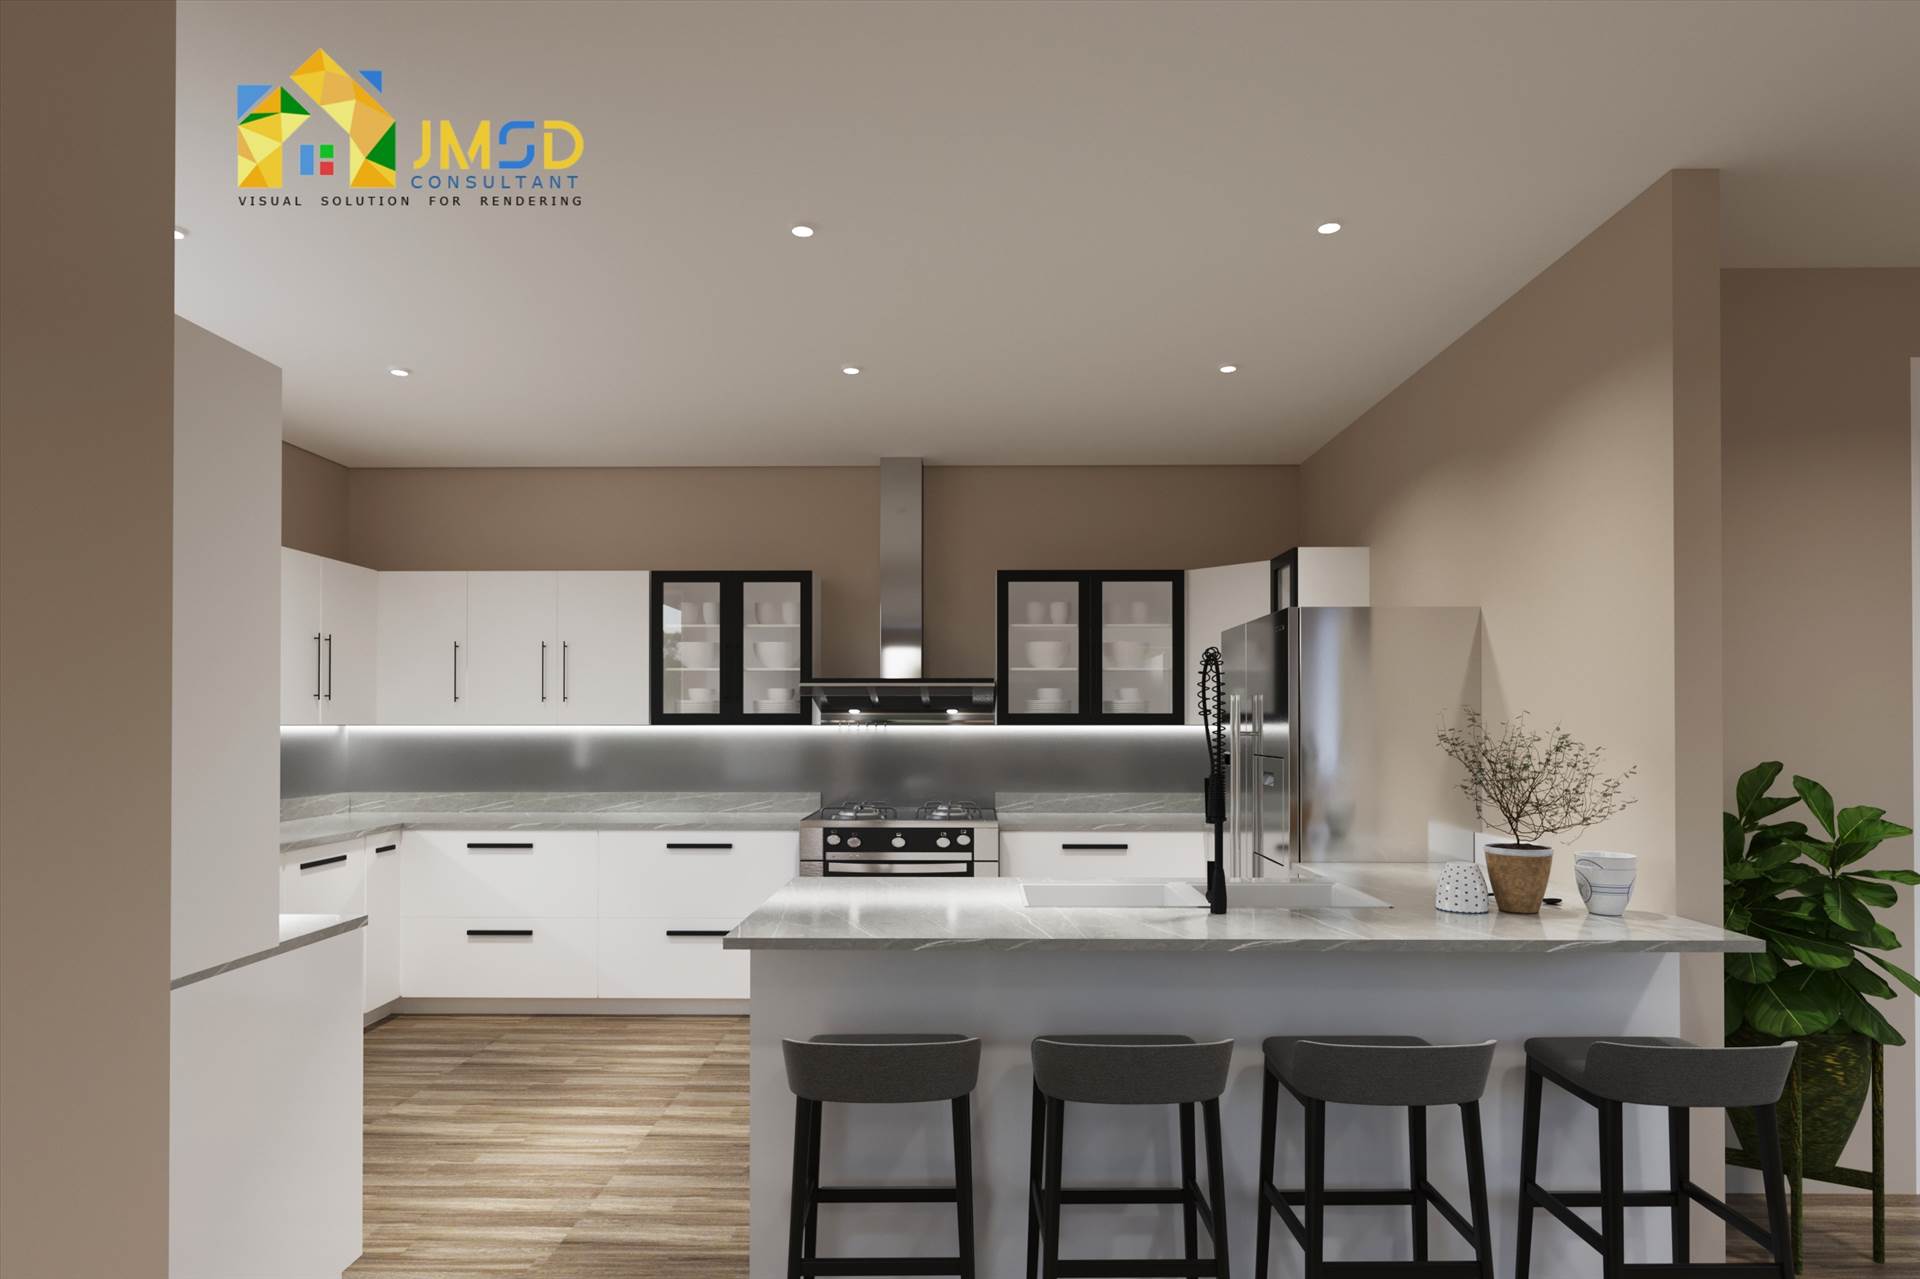 3D Rendering for Kitchen Design Visualization Philadelphia Pennsylvania A 3D rendering of a Kitchen Visualization Design is a CGI Render that shows the future interior design of the space in photoreal quality. by JMSDCONSULTANT